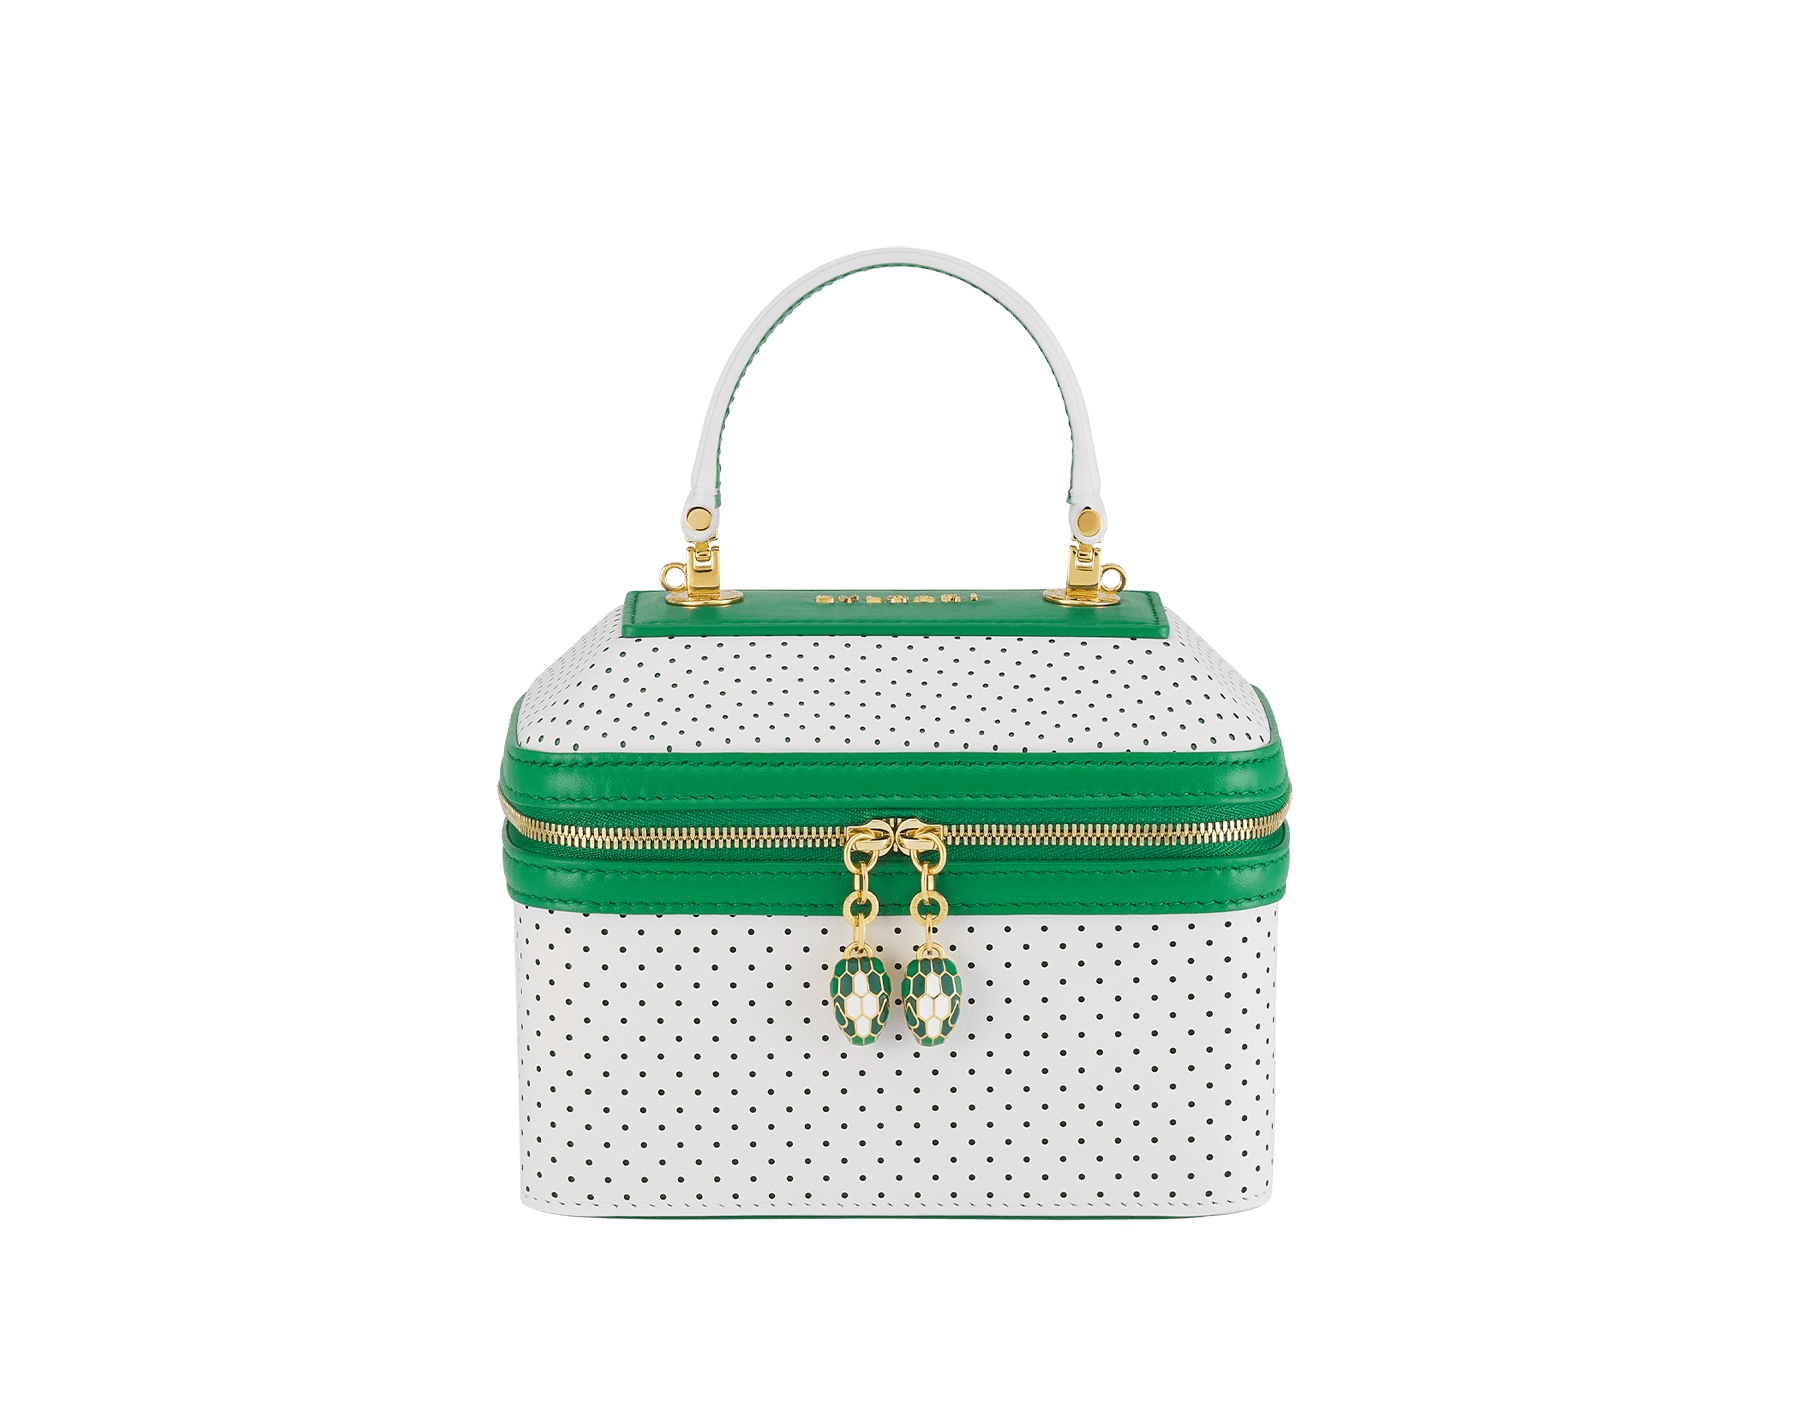 Casablanca x Bulgari small jewellery box bag in white Tennis Groundstroke perforated calf leather with smooth tennis green calf leather inserts and tennis green nappa leather lining. Captivating snakehead zip pullers in gold-plated brass embellished with dégradé green and bright white enamel scales, and green malachite eyes. 292332 image 1